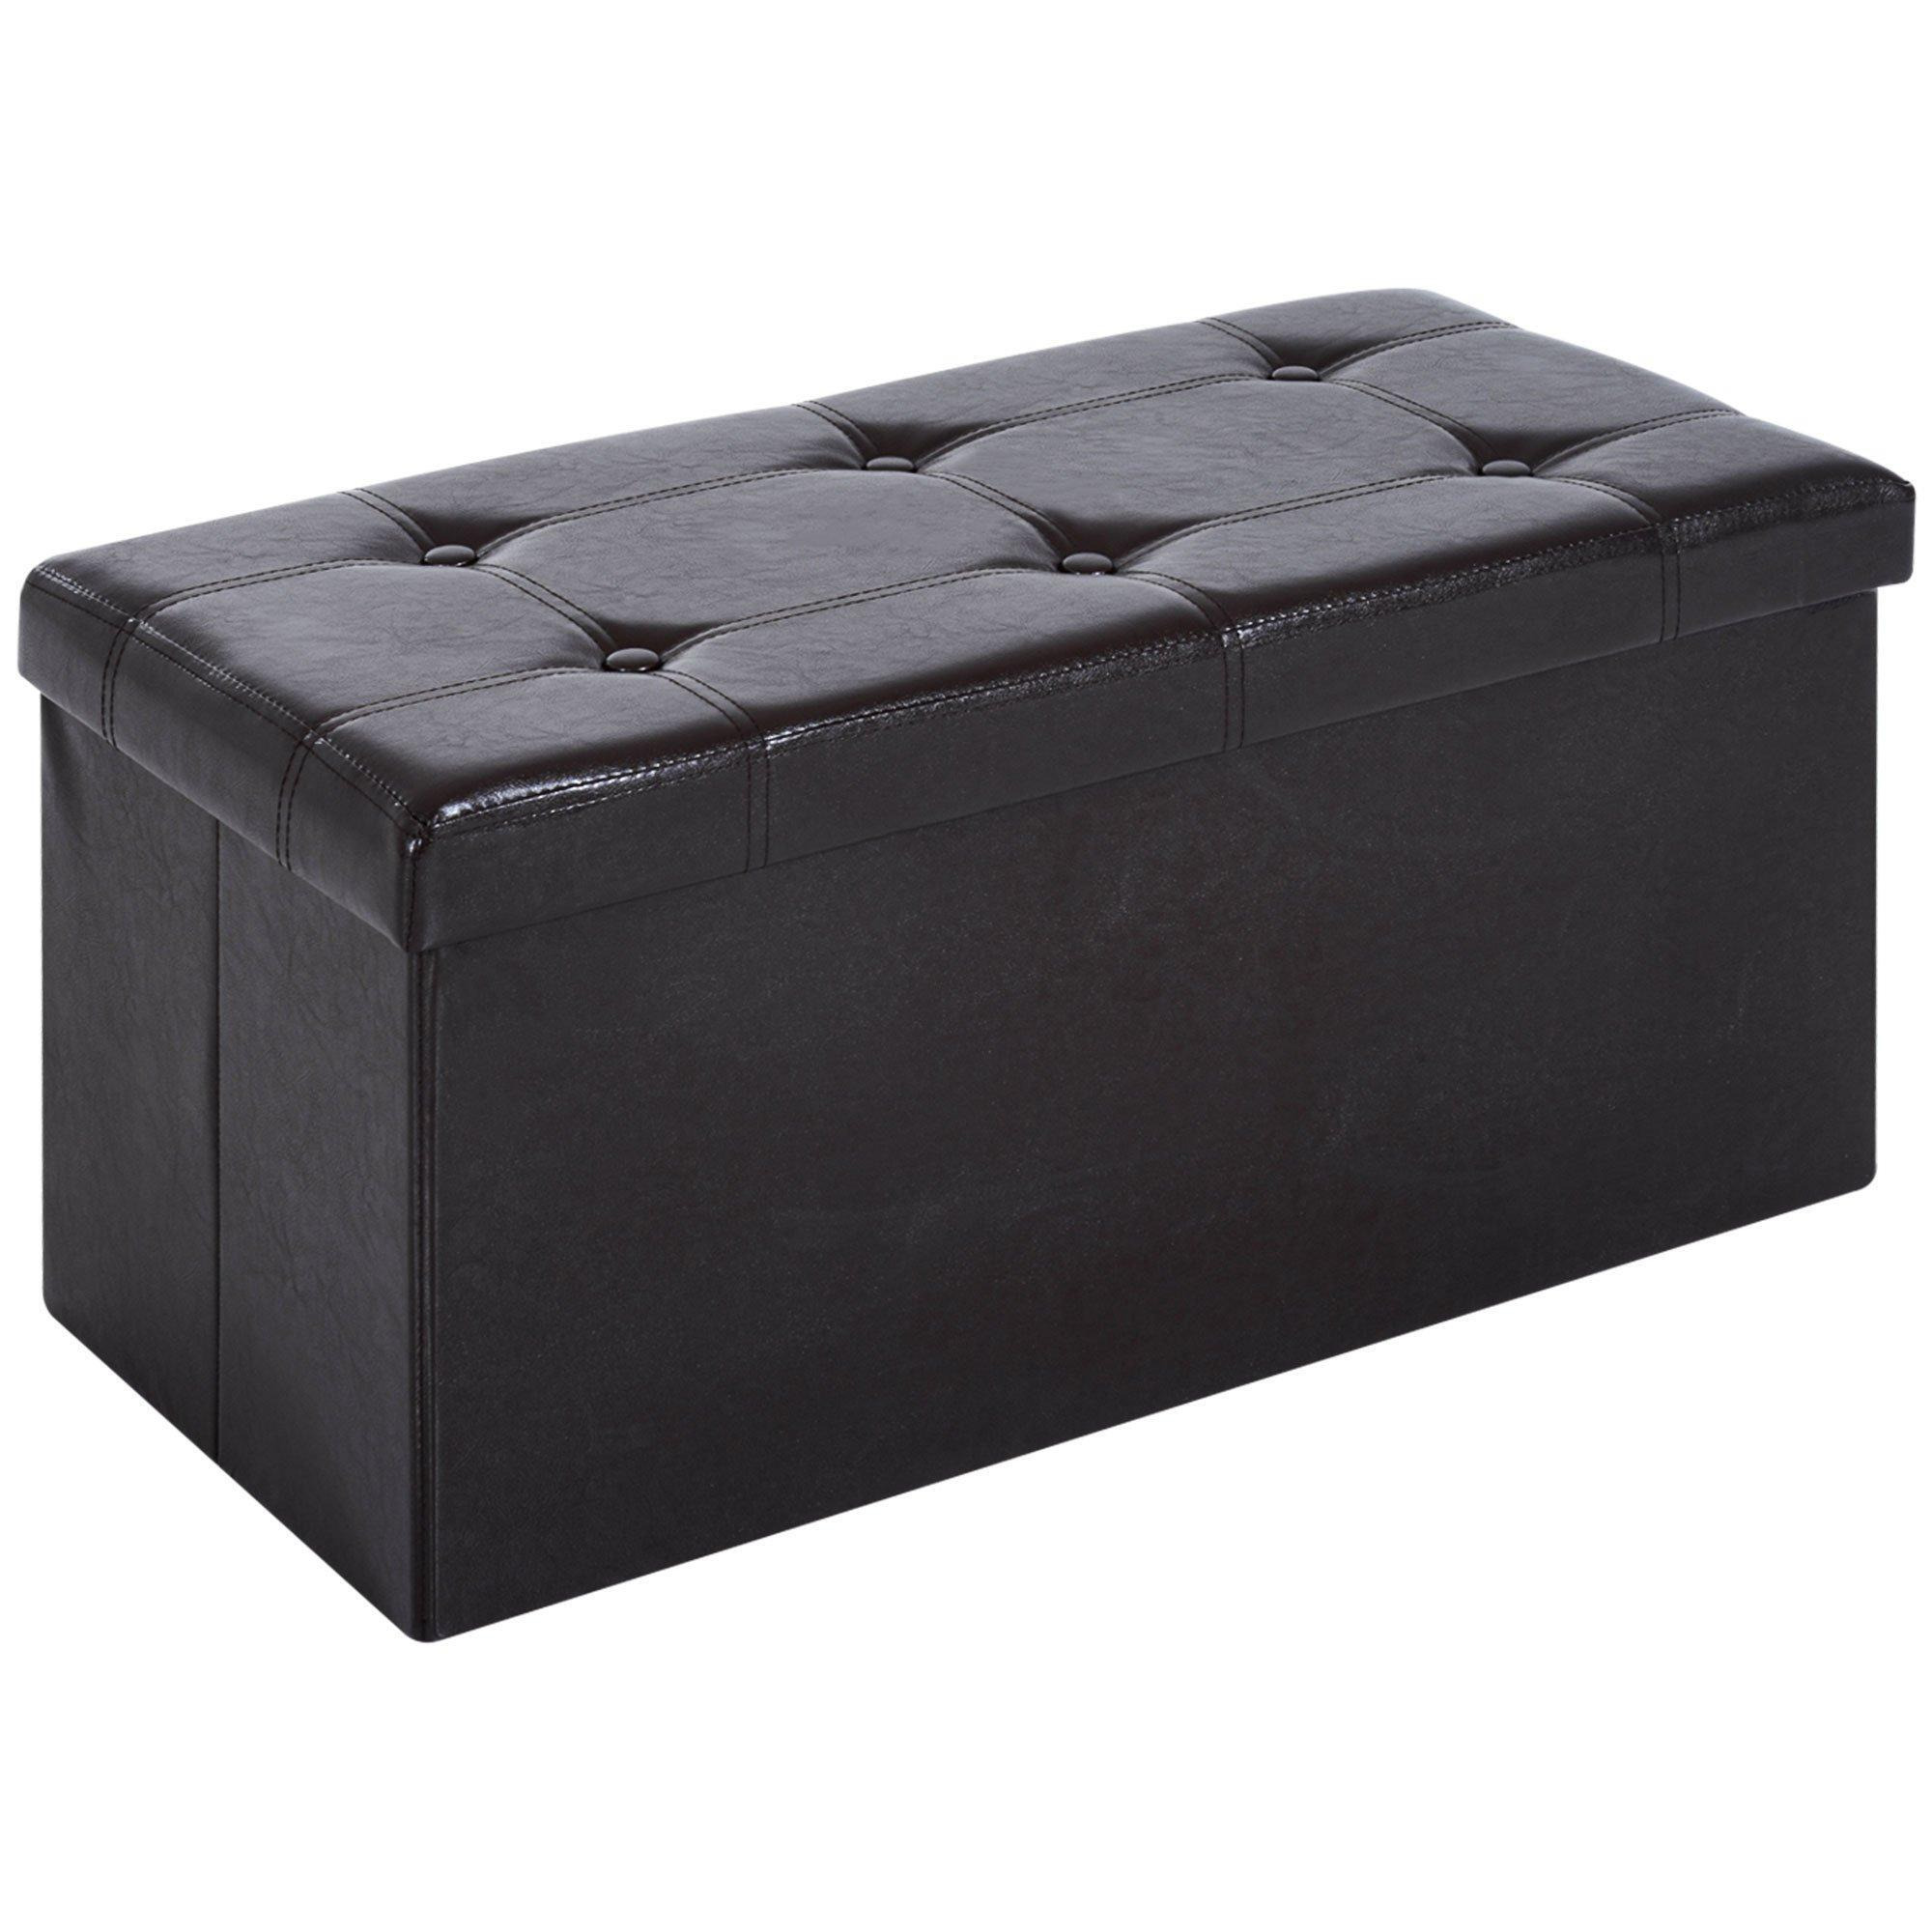 PU Leather Ottoman Storage Bench Folding Footstool Button Tufted - image 1